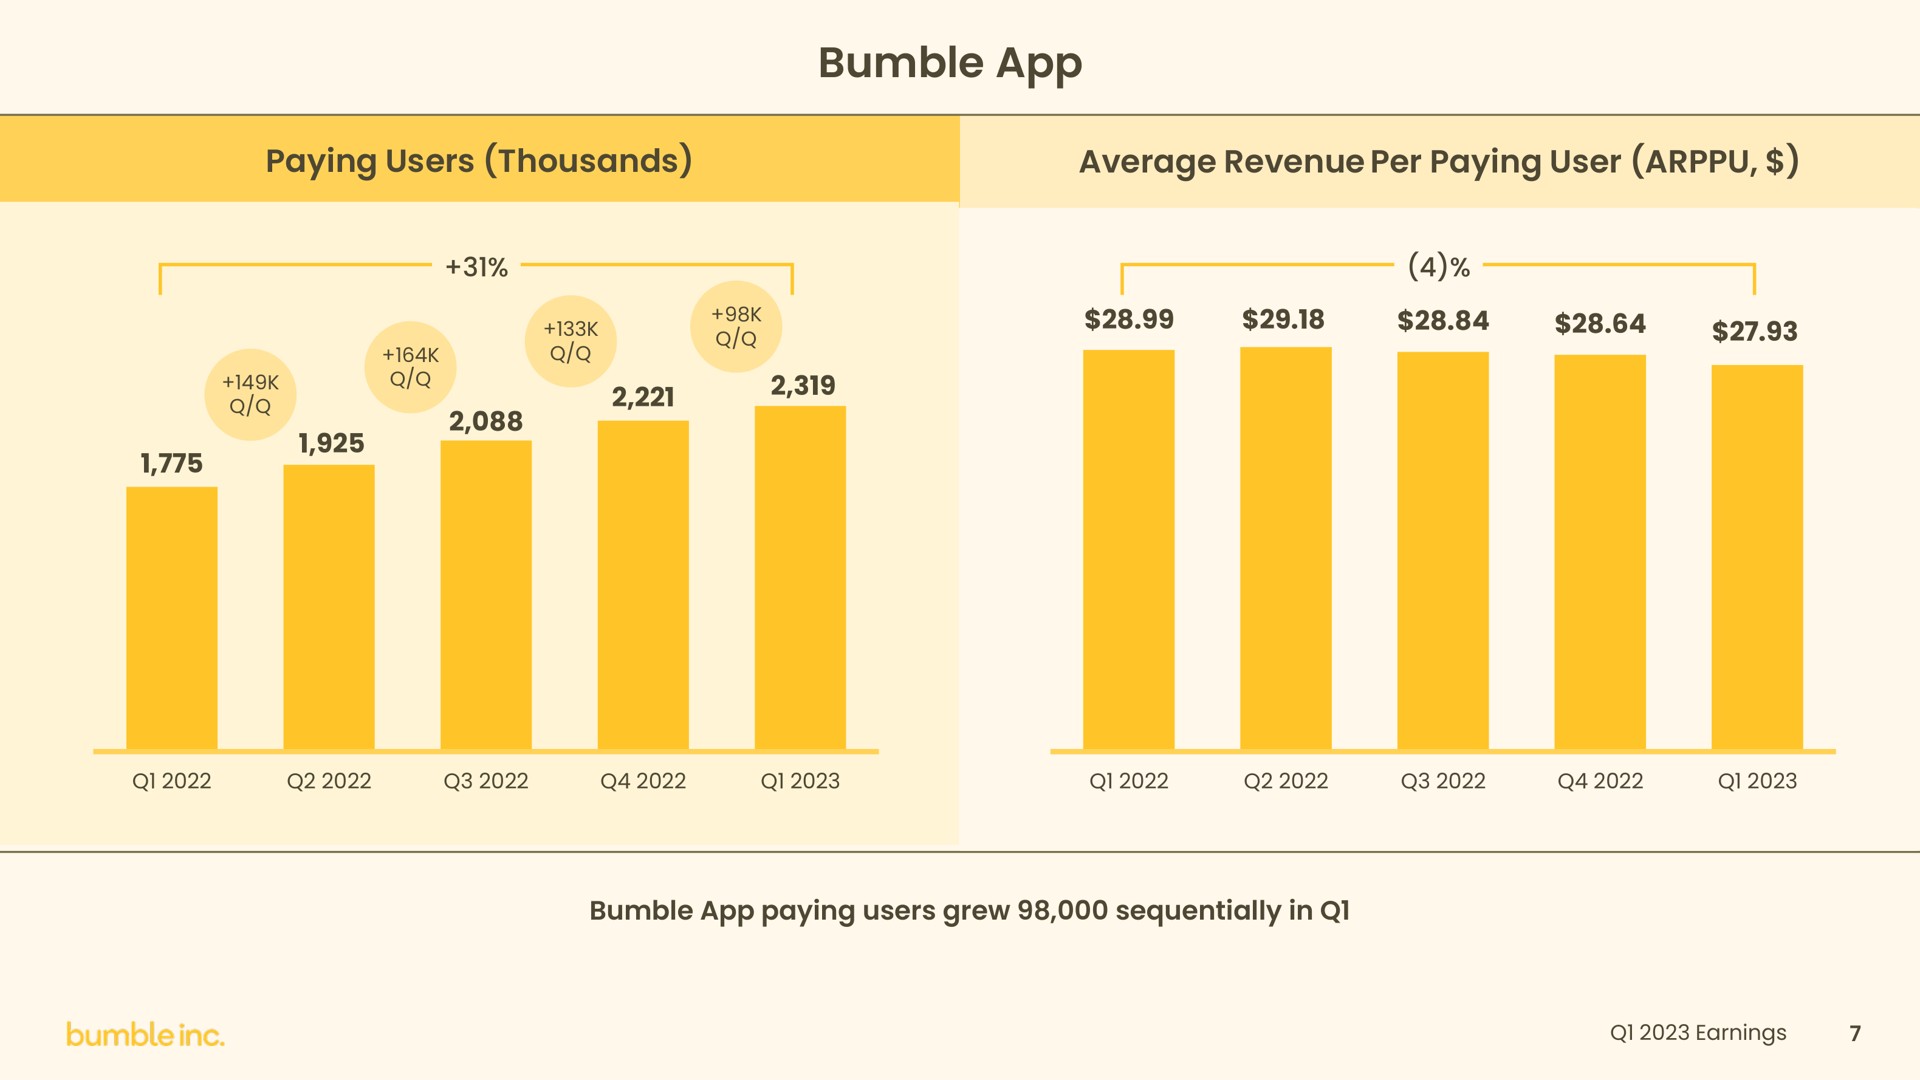 bumble a average revenue per paying user | Bumble